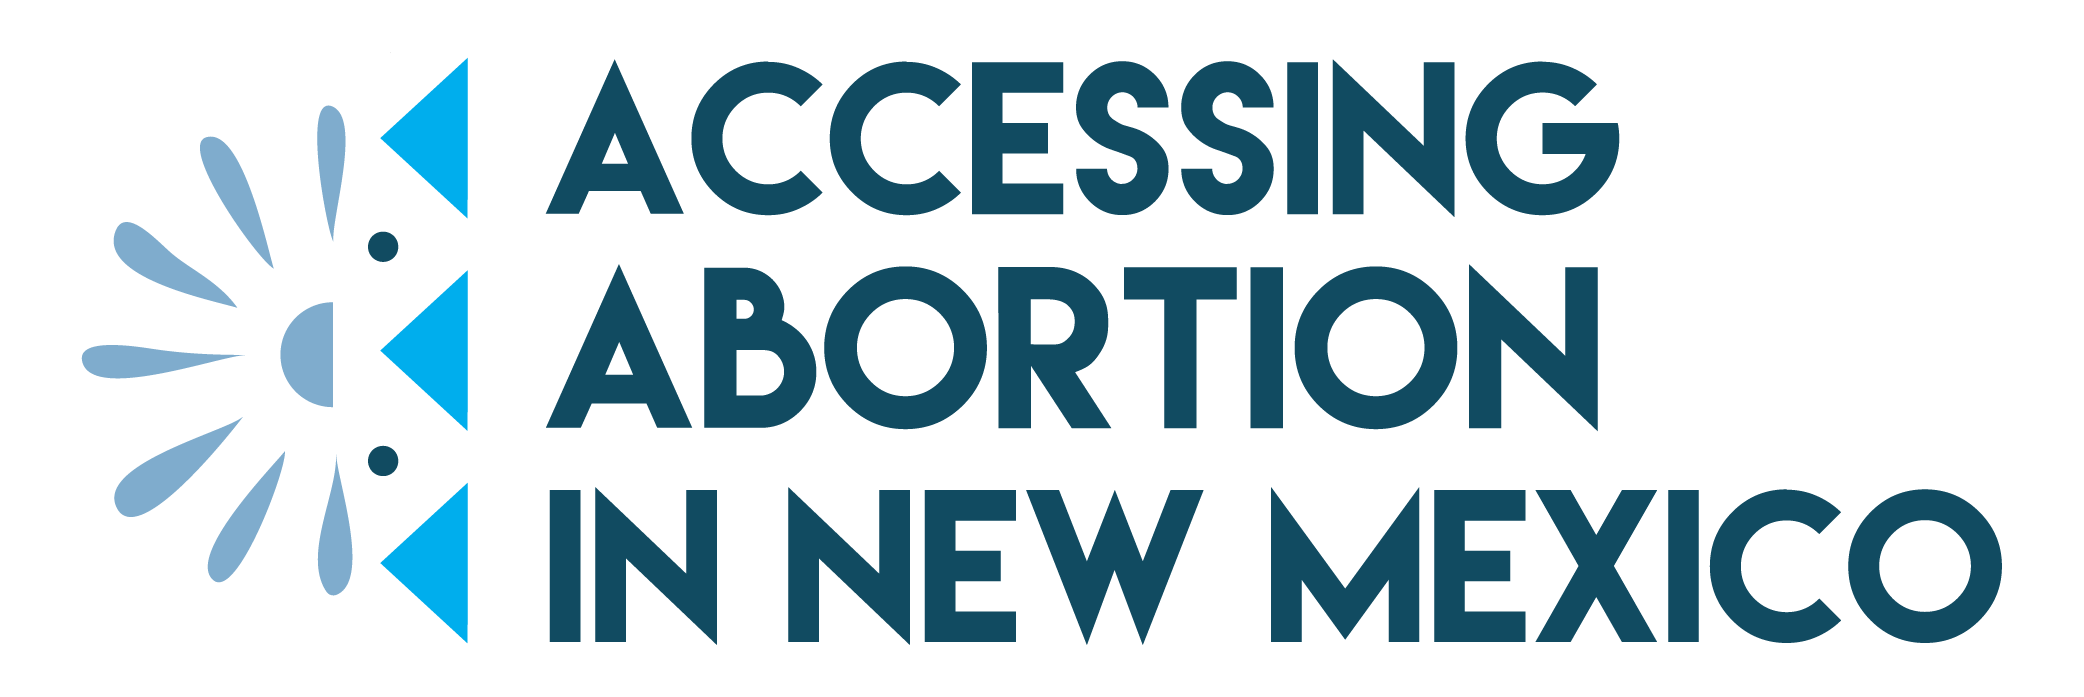 Accessing Abortion in New Mexico